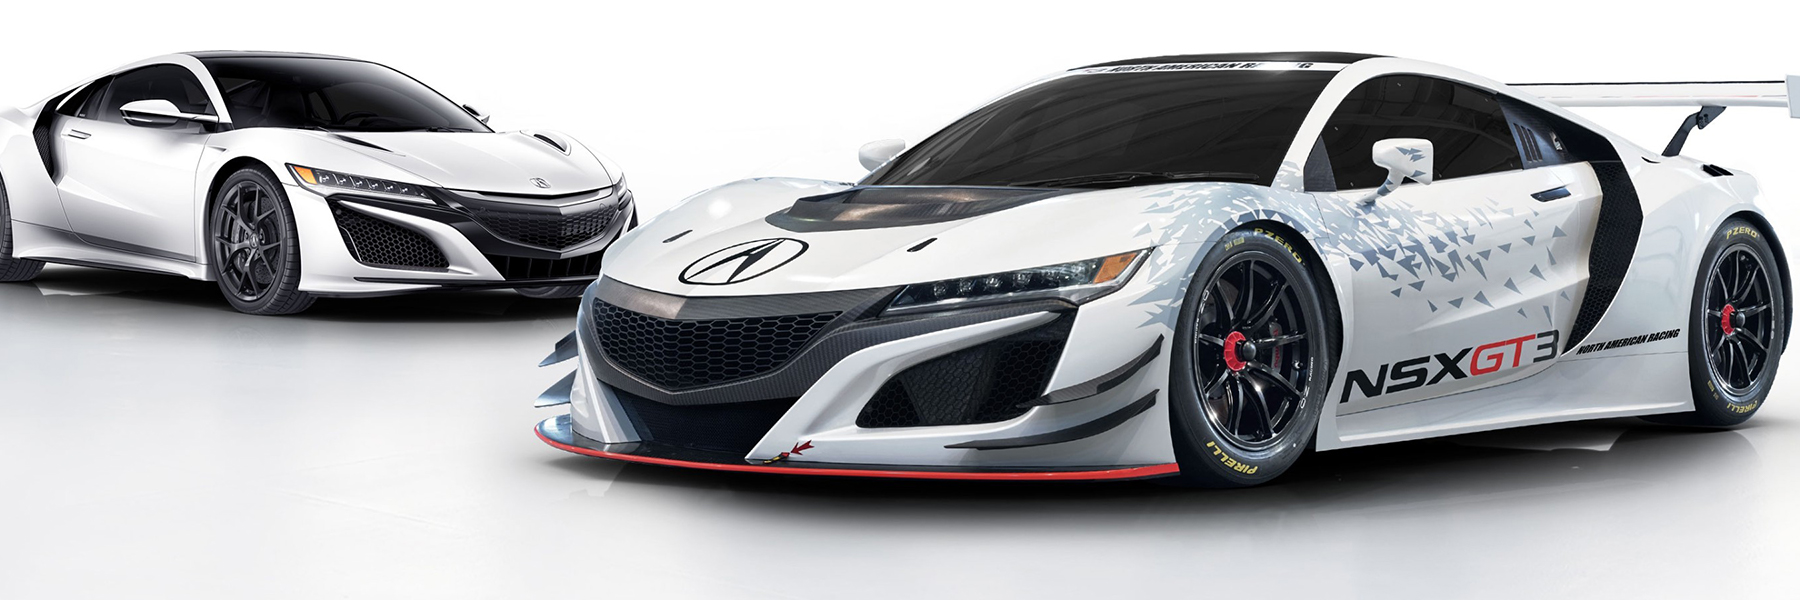 White 2018 Acura NSX and Acura NSX GT3